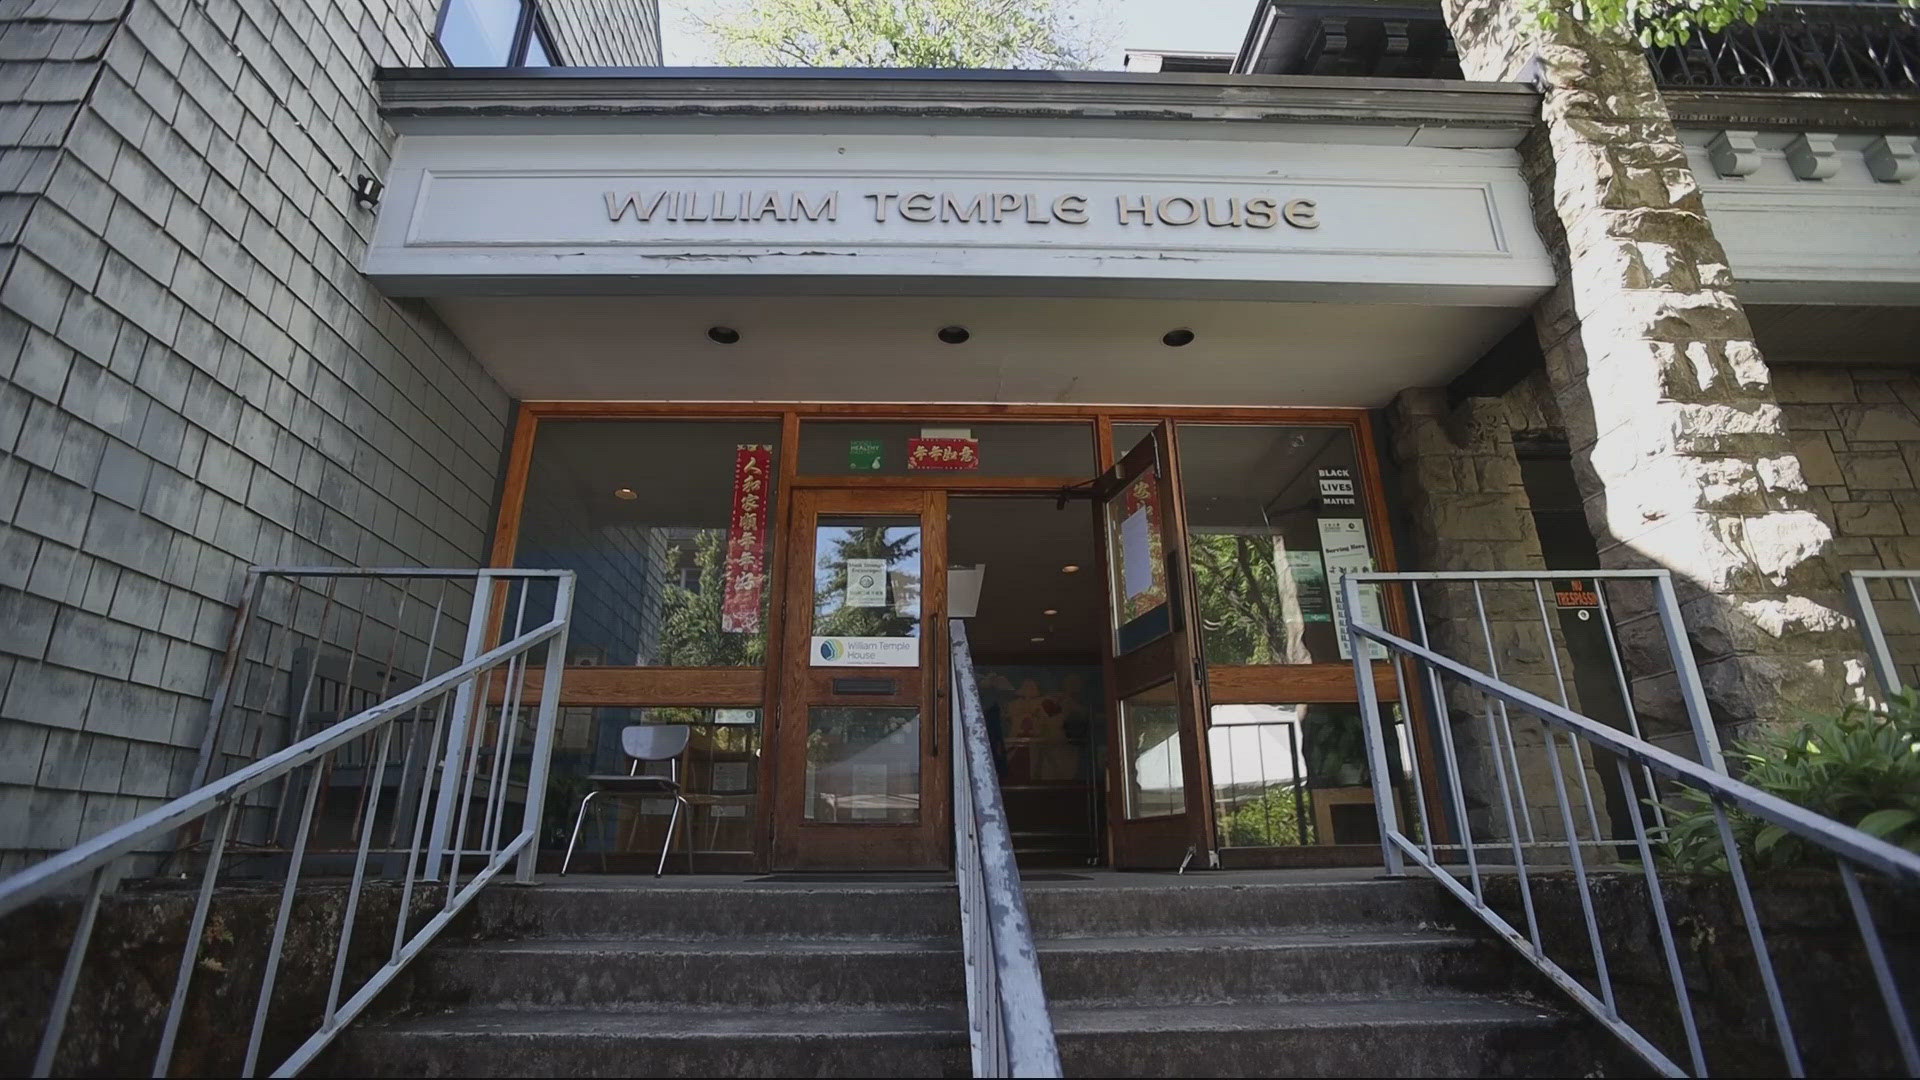 William Temple House offers social services, such as food assistance, and counseling.